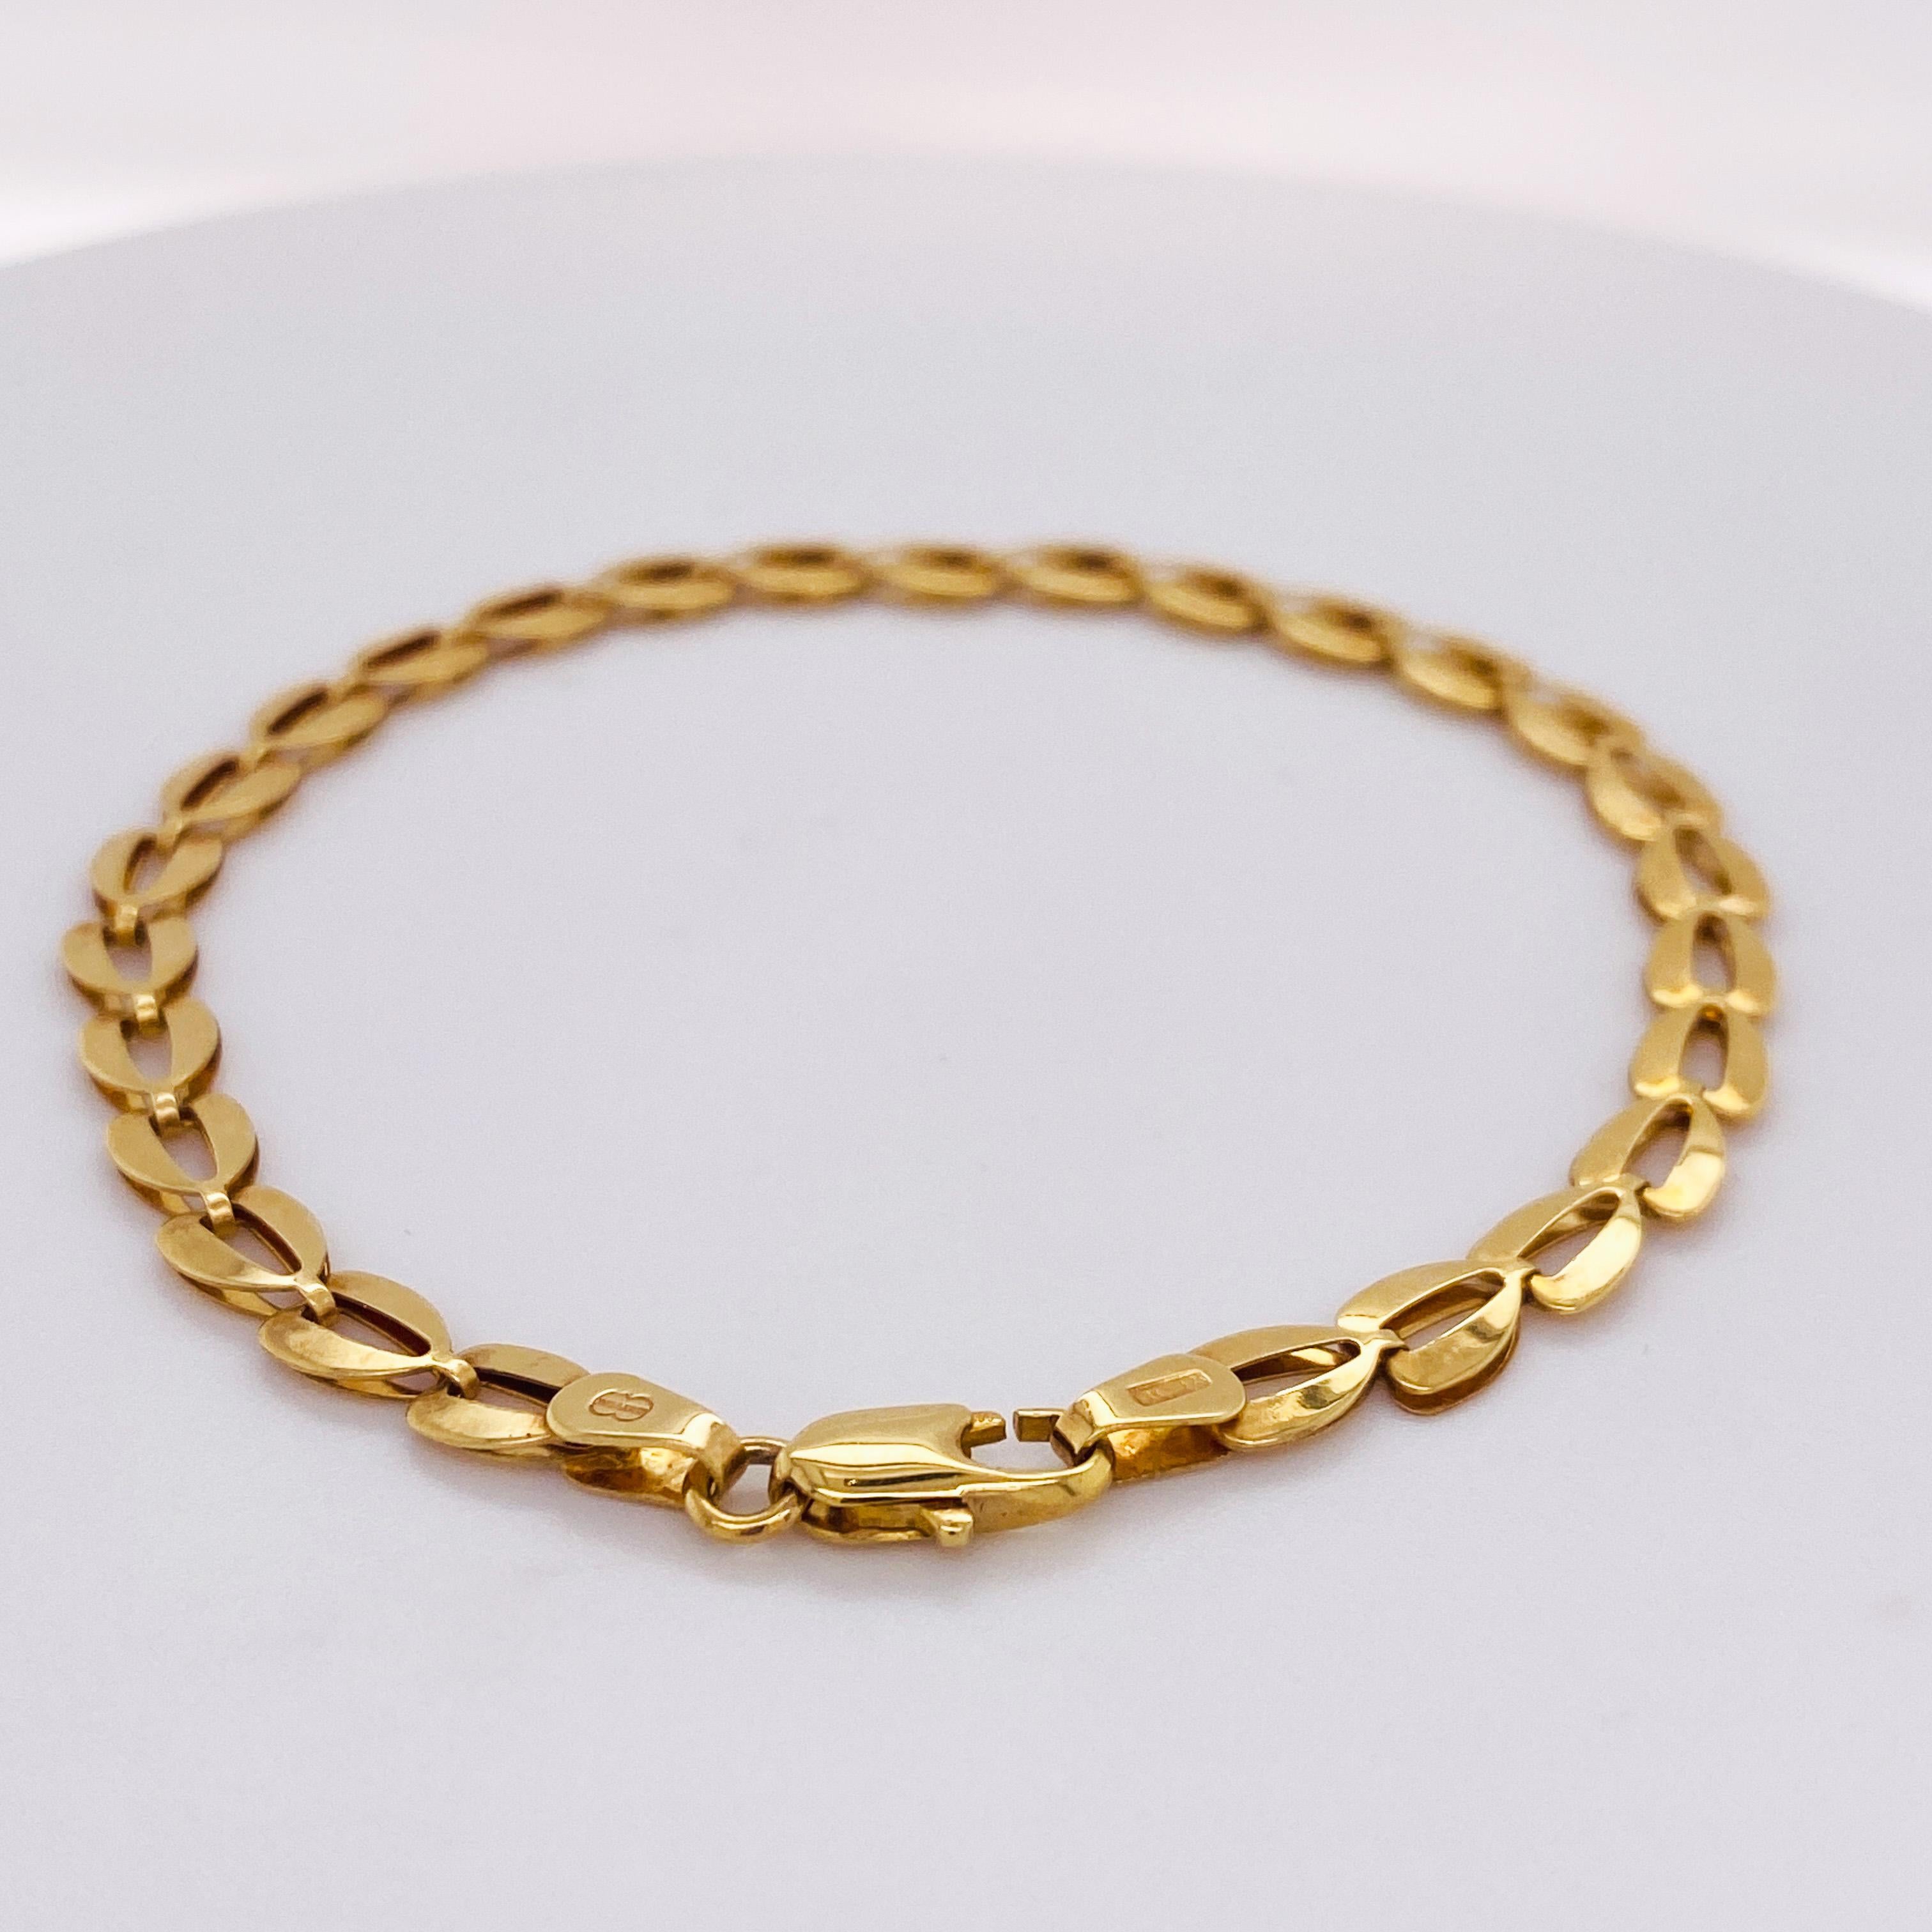 The unique fancy links of this bracelet look like the hoof prints of a deer dancing across your wrist, or stylized hearts! You can subtly state your love with this lovely bracelet! You can stack this with some other favorite bracelets or wear it